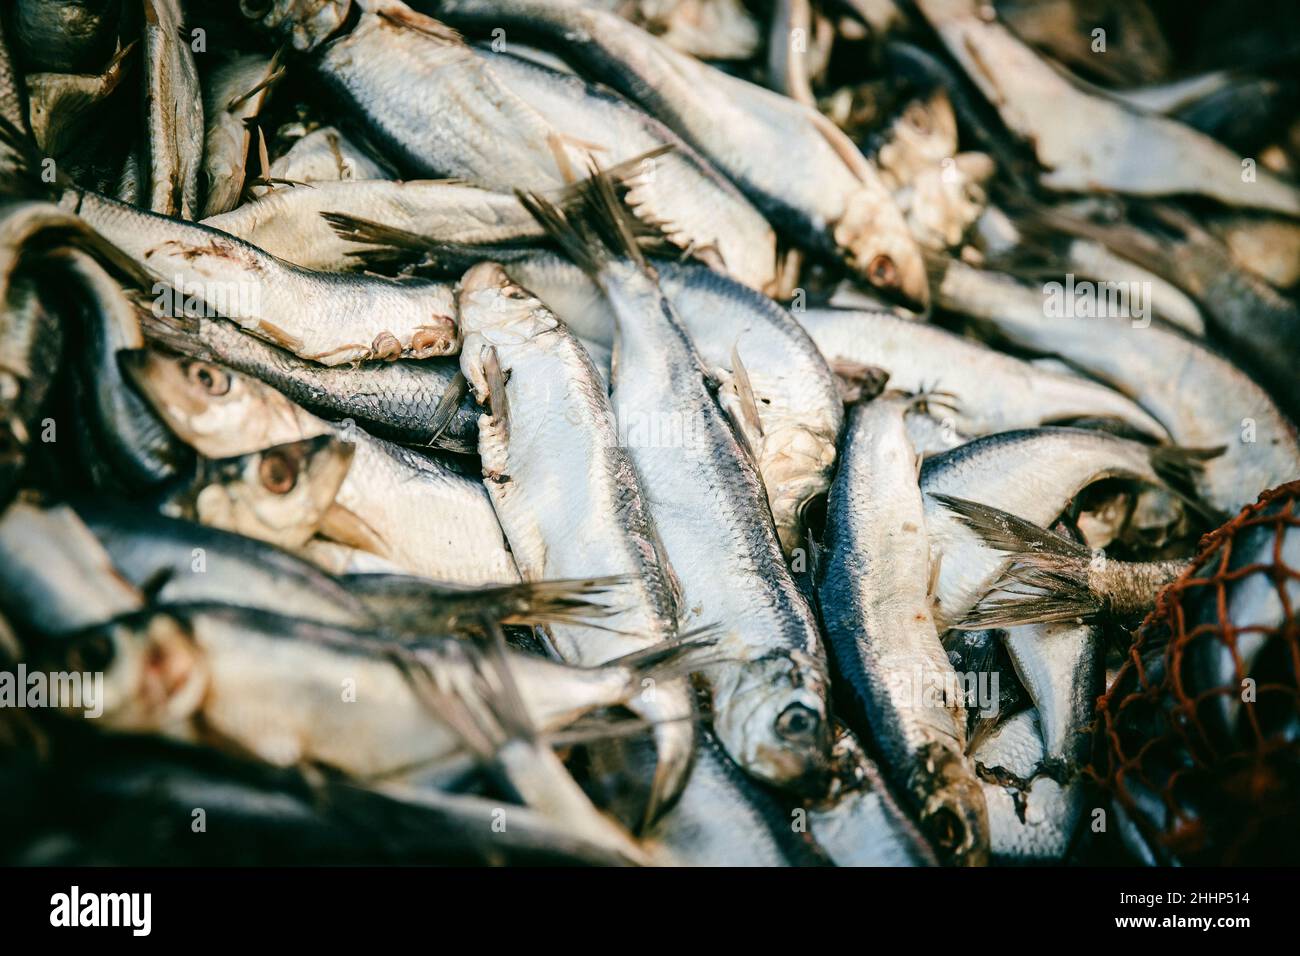 A pile of fish used for Lobster fishing bait Stock Photo